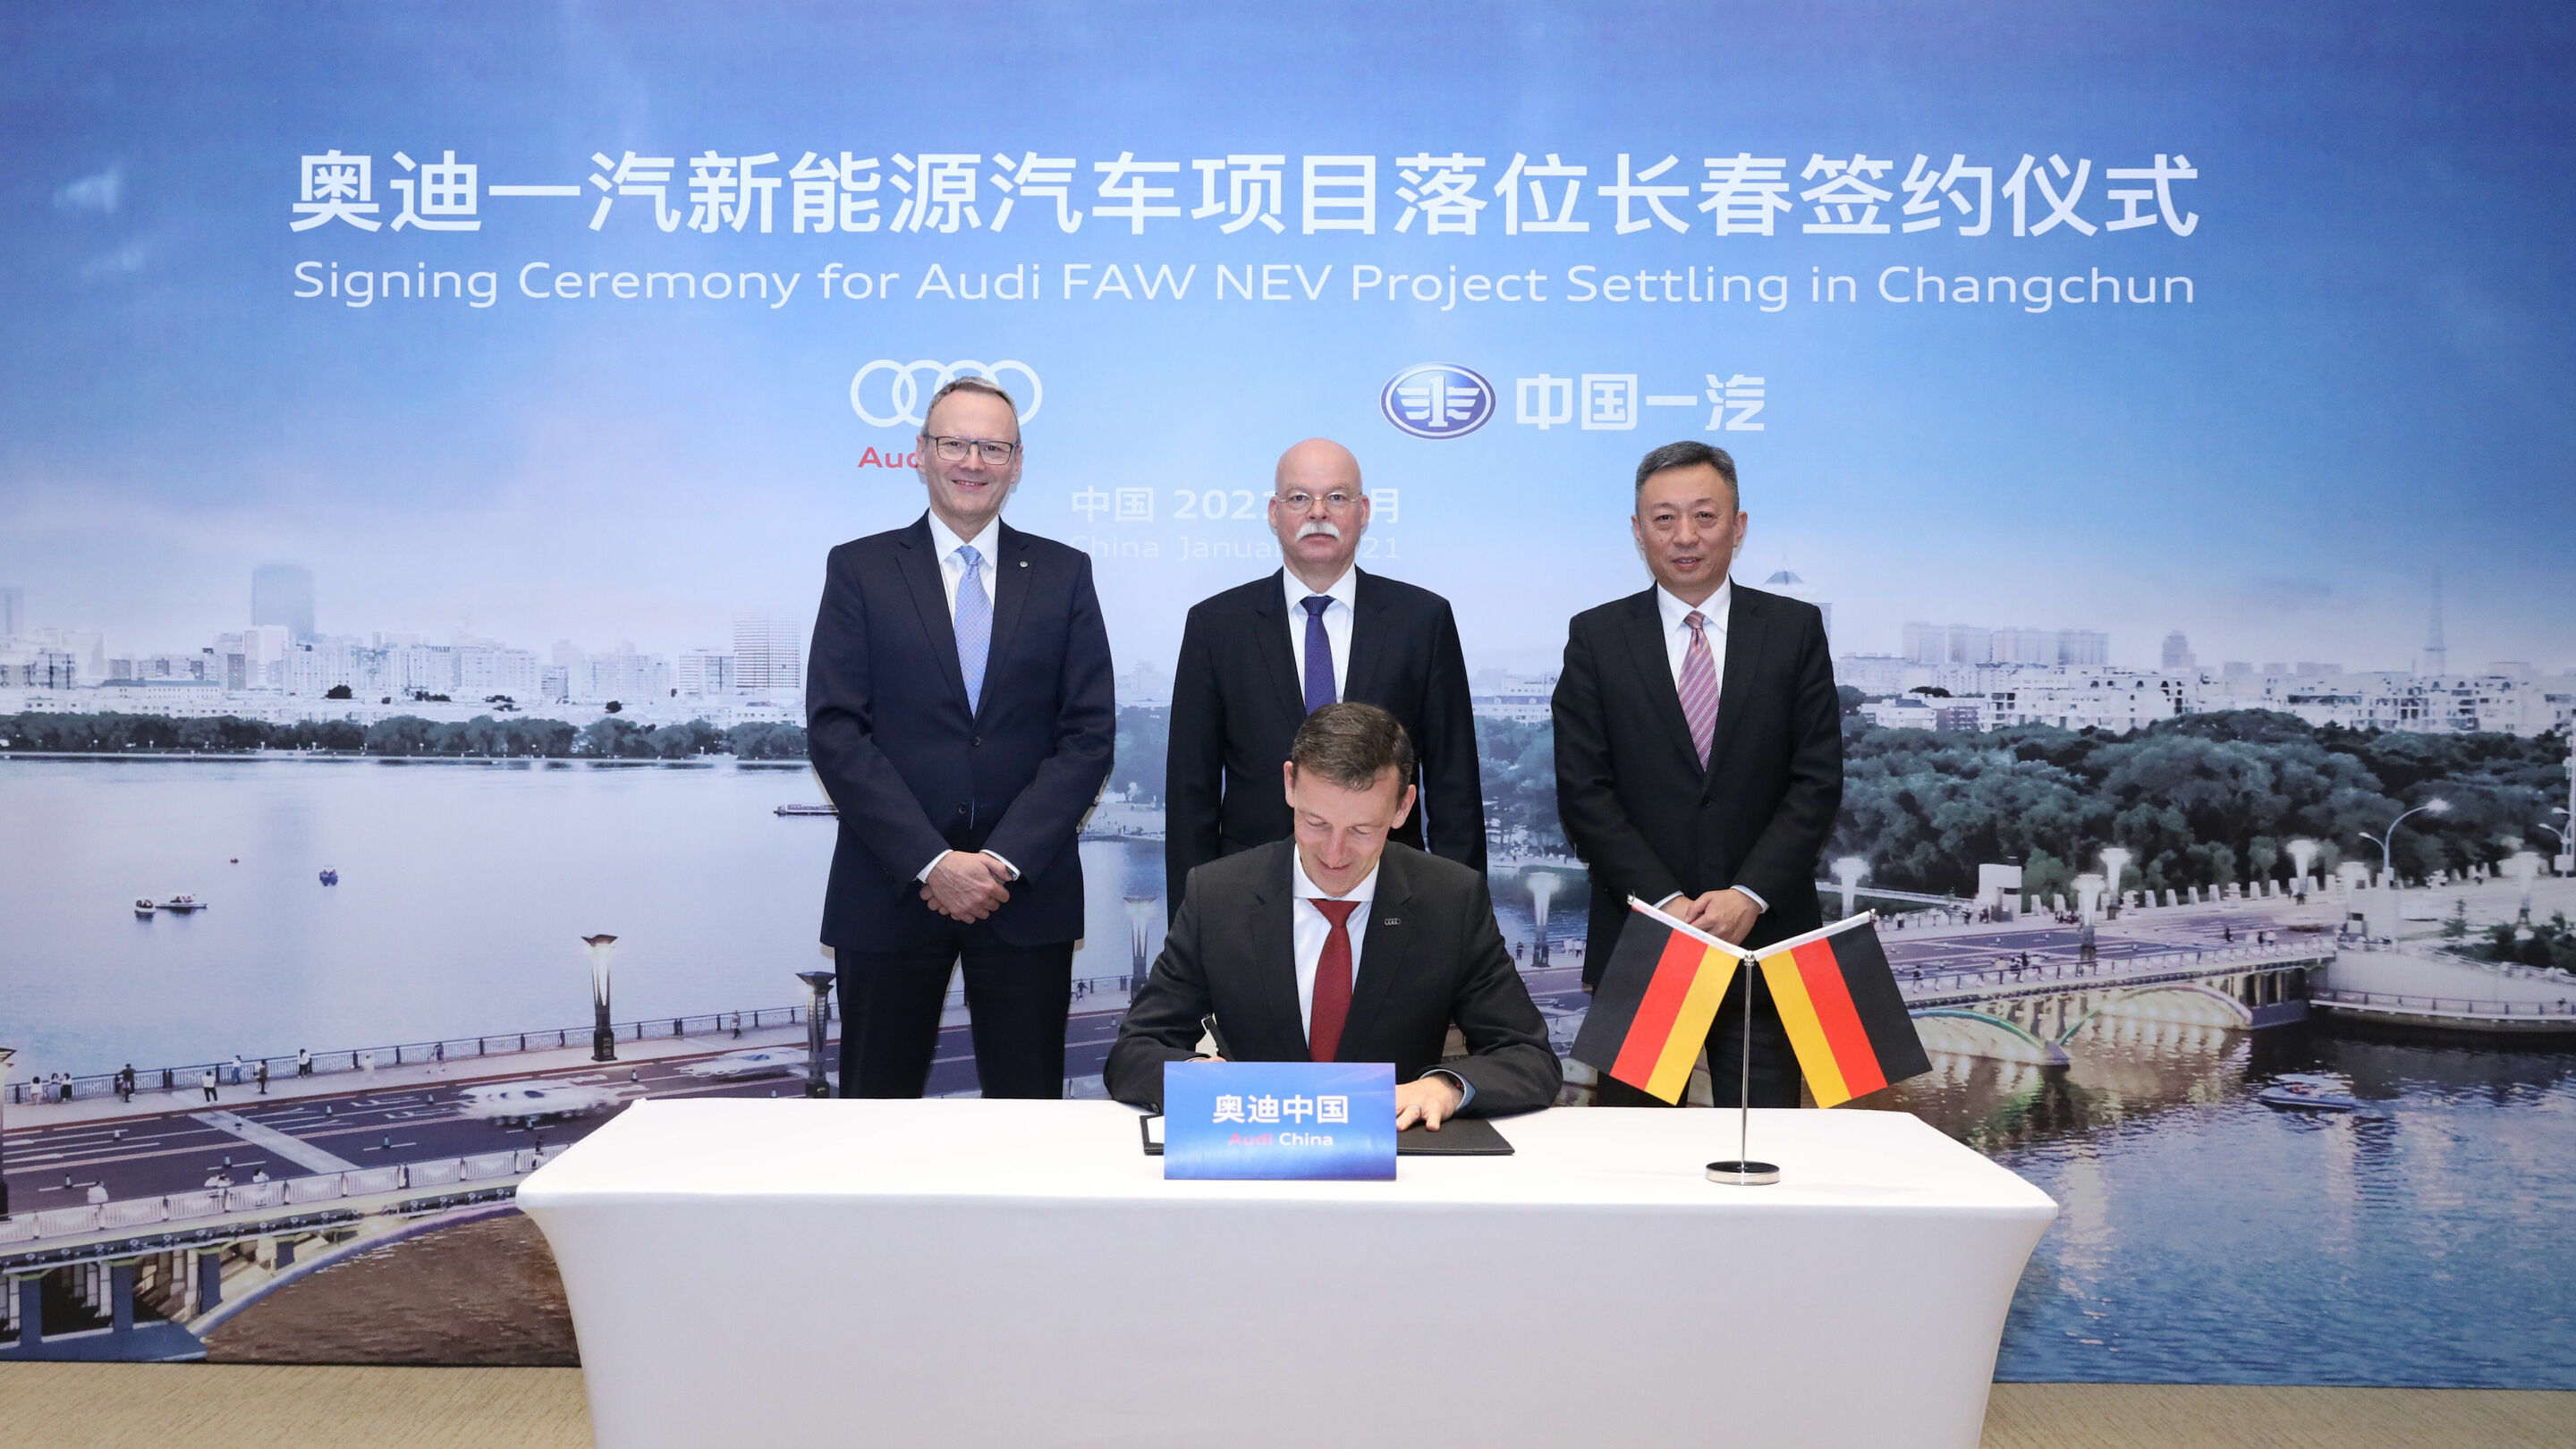 Ceremonial signing in China confirmed that Changchun will be the headquarters of the newly founded Audi-FAW company